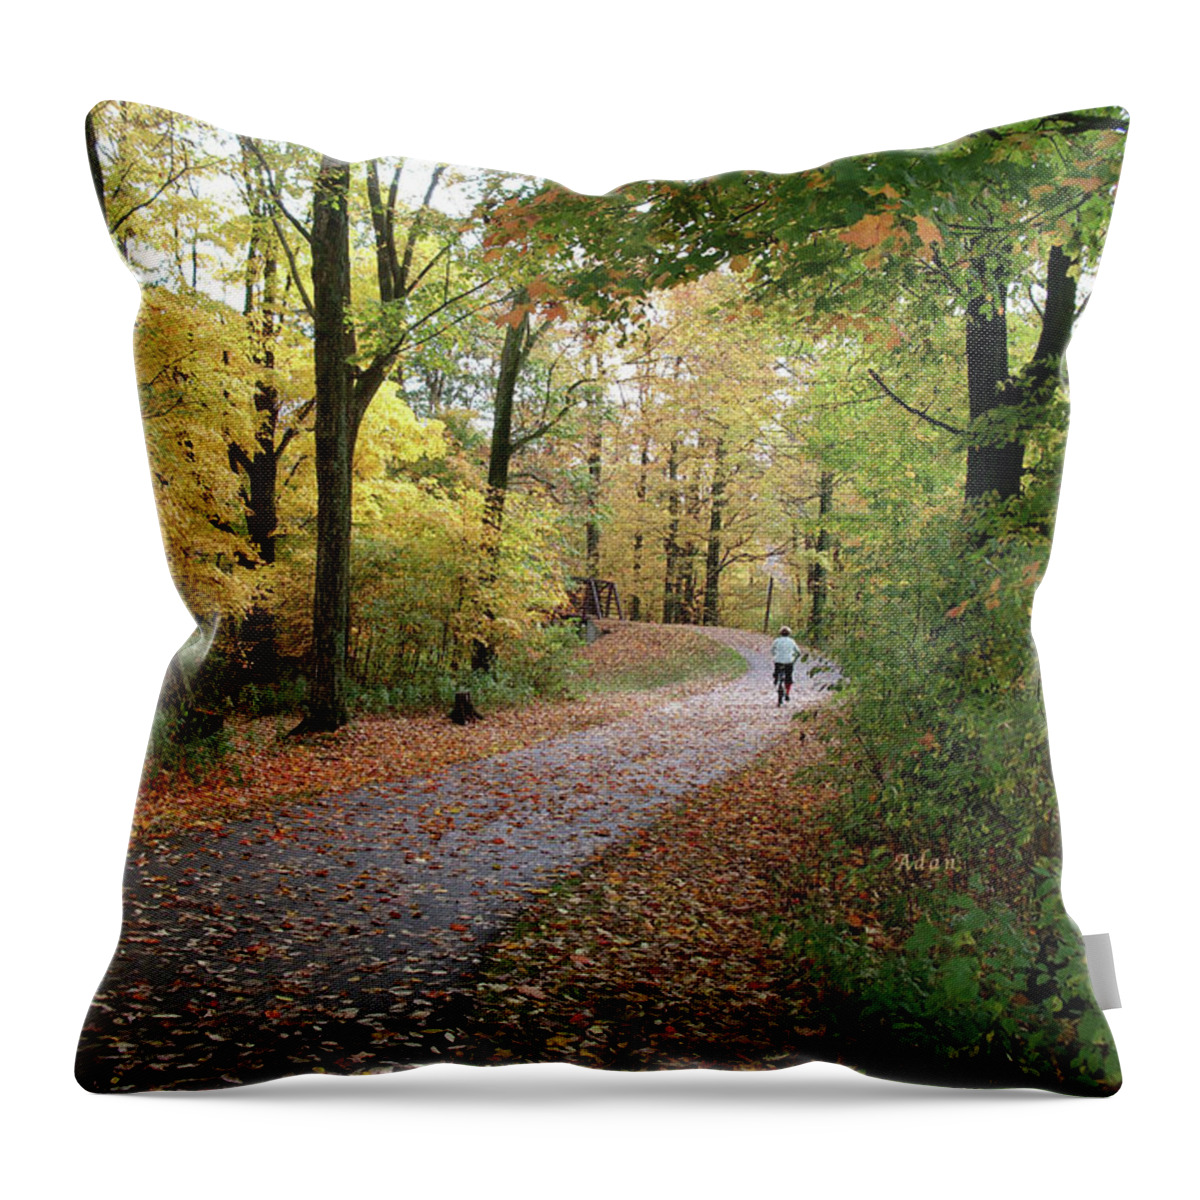 Fall Colors Throw Pillow featuring the photograph Autumn Bicycling by Felipe Adan Lerma